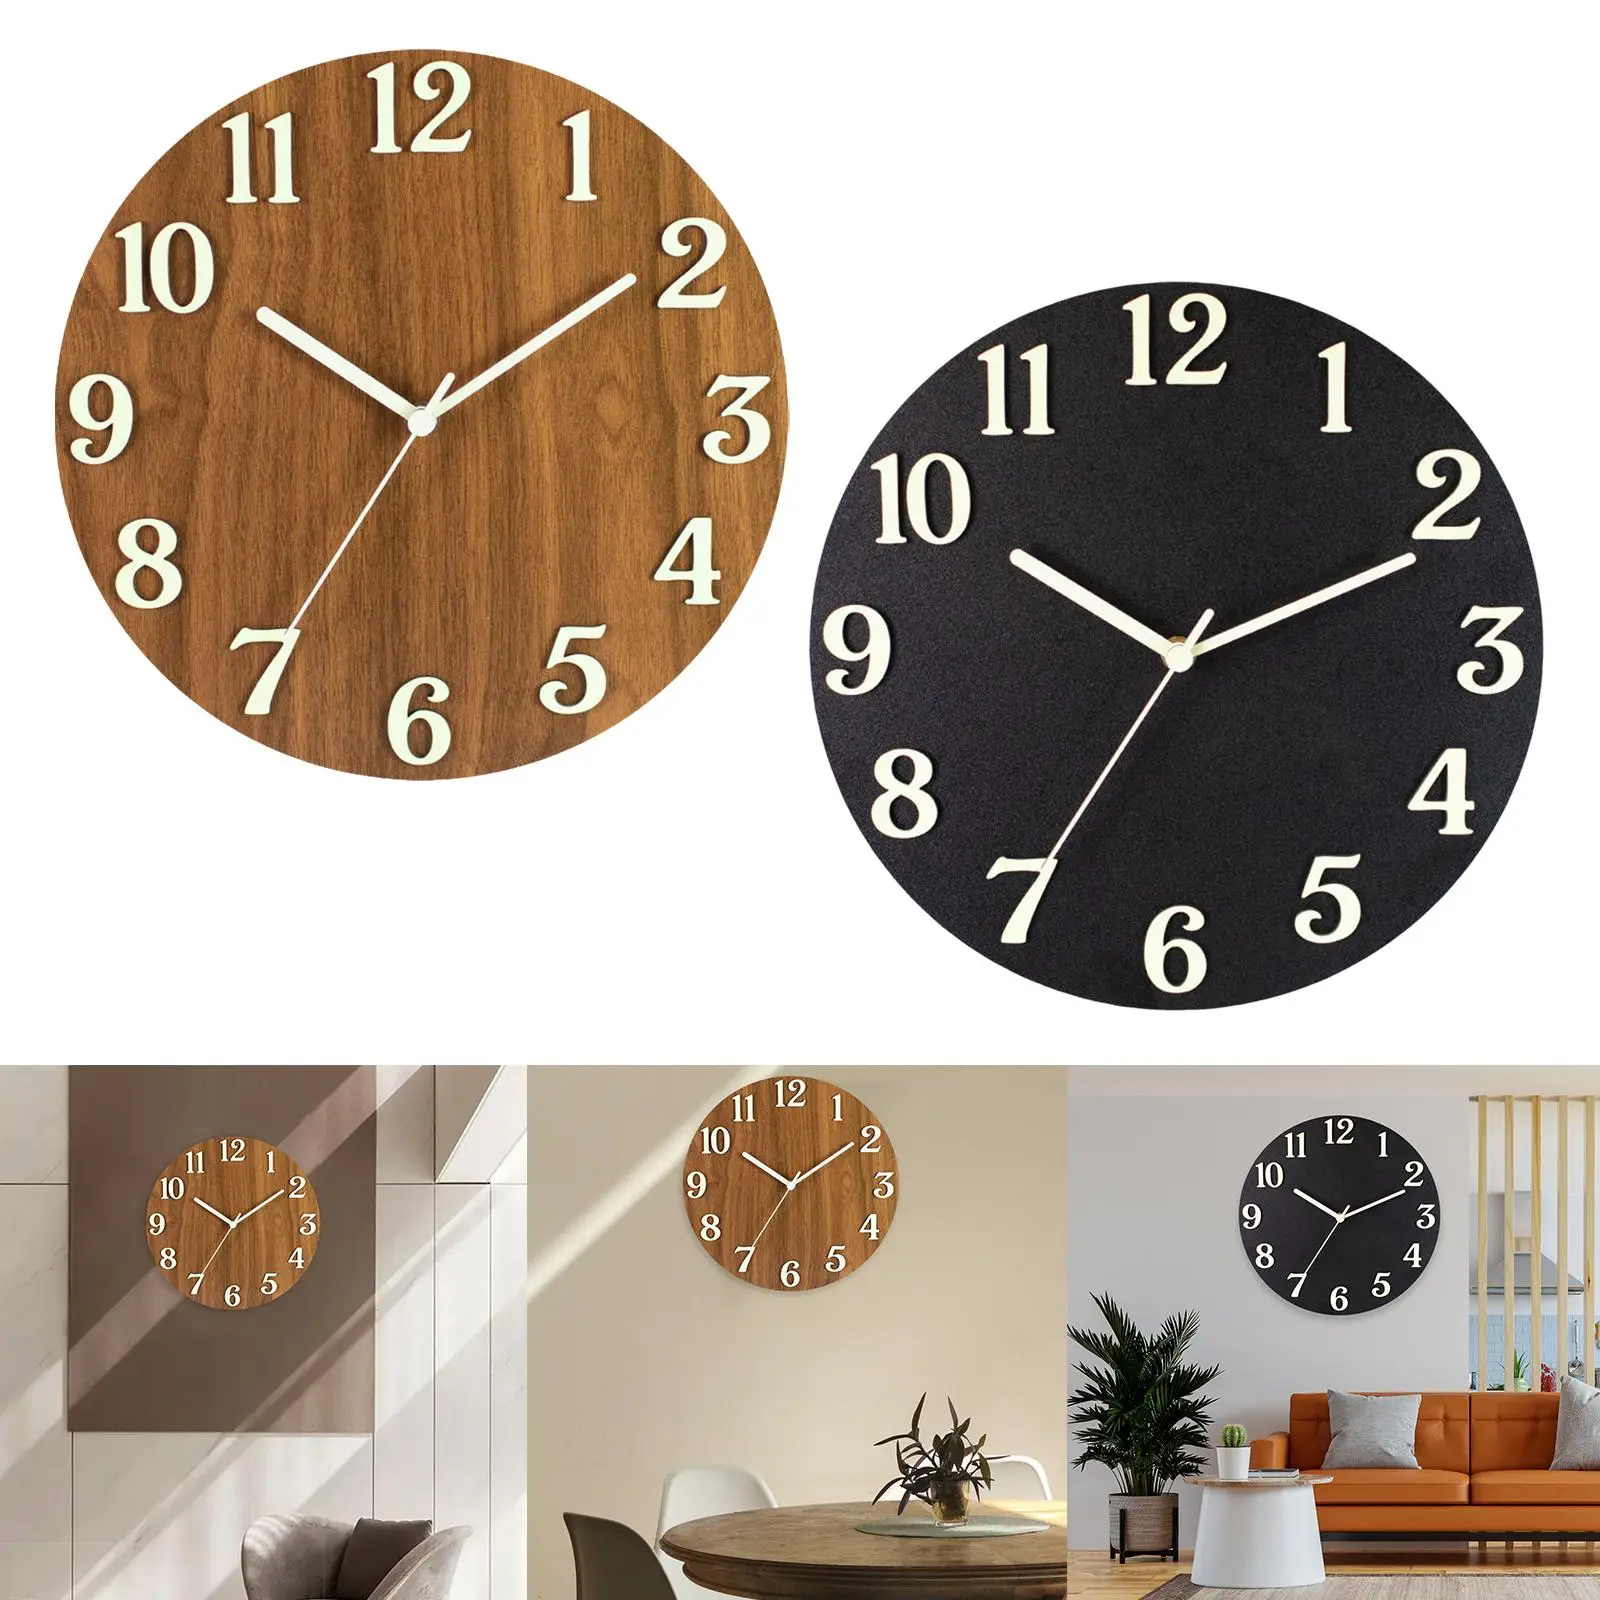 Modern Luminous Wall Clock Hanging Clock Non Ticking Battery Operated Analog Silent Round 12 inch for Dining Room Kitchen Home